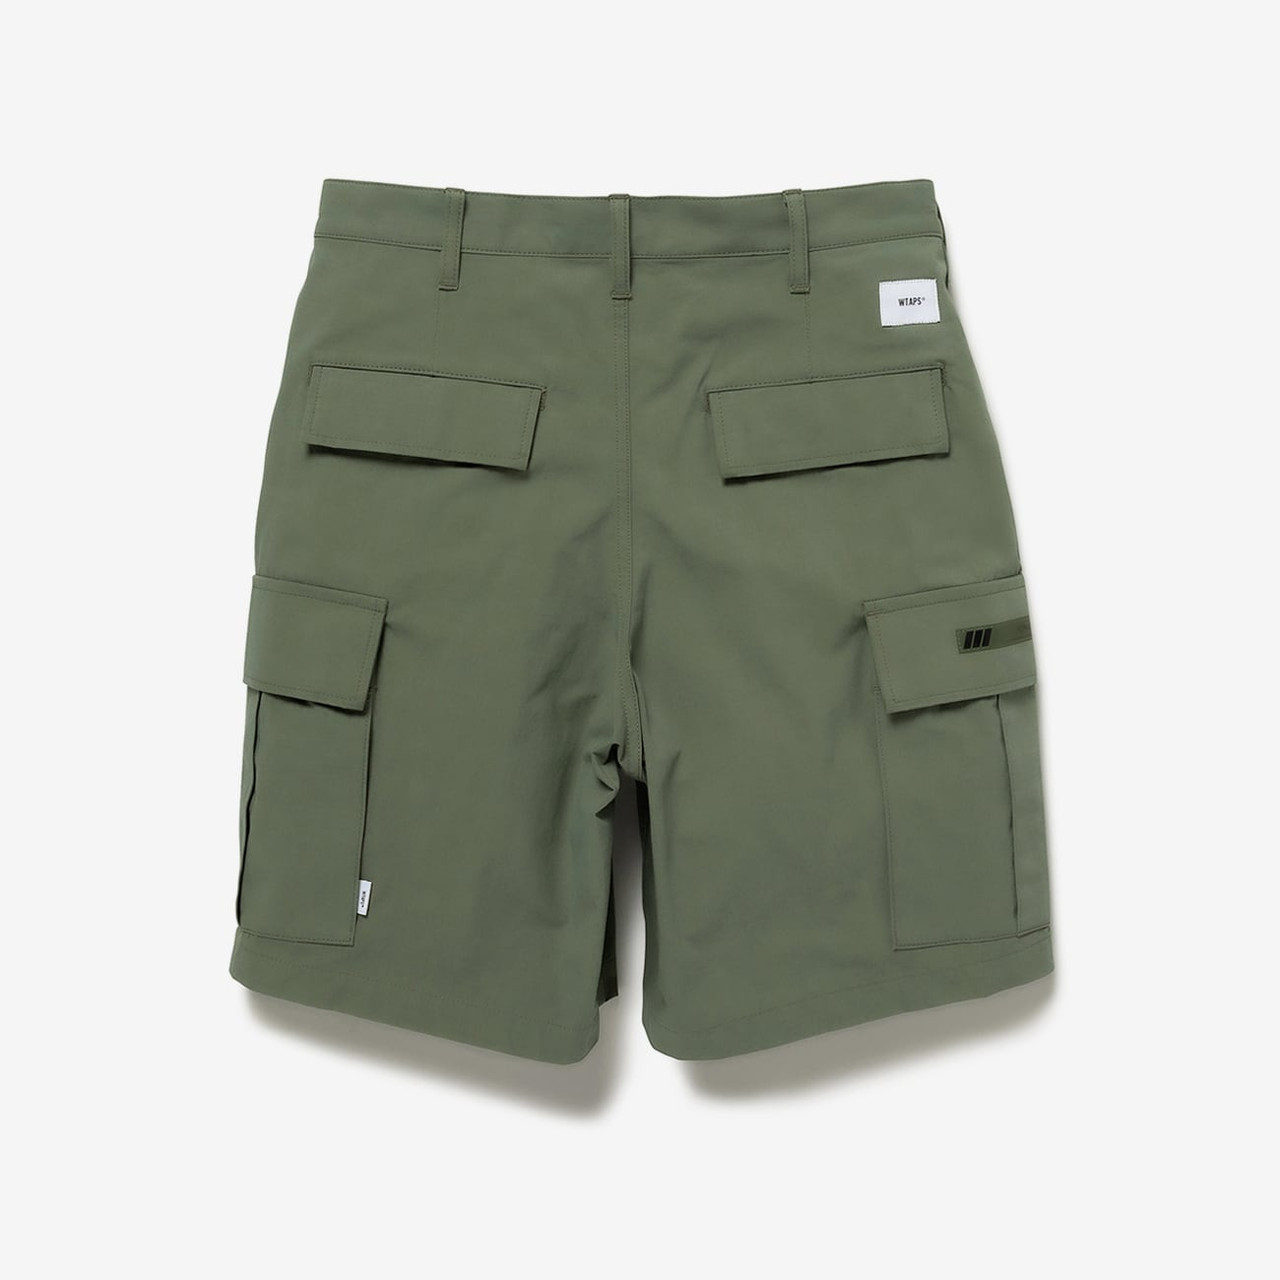 MILS9601 / SHORTS / NYCO. RIPSTOP 231WVDT-PTM10